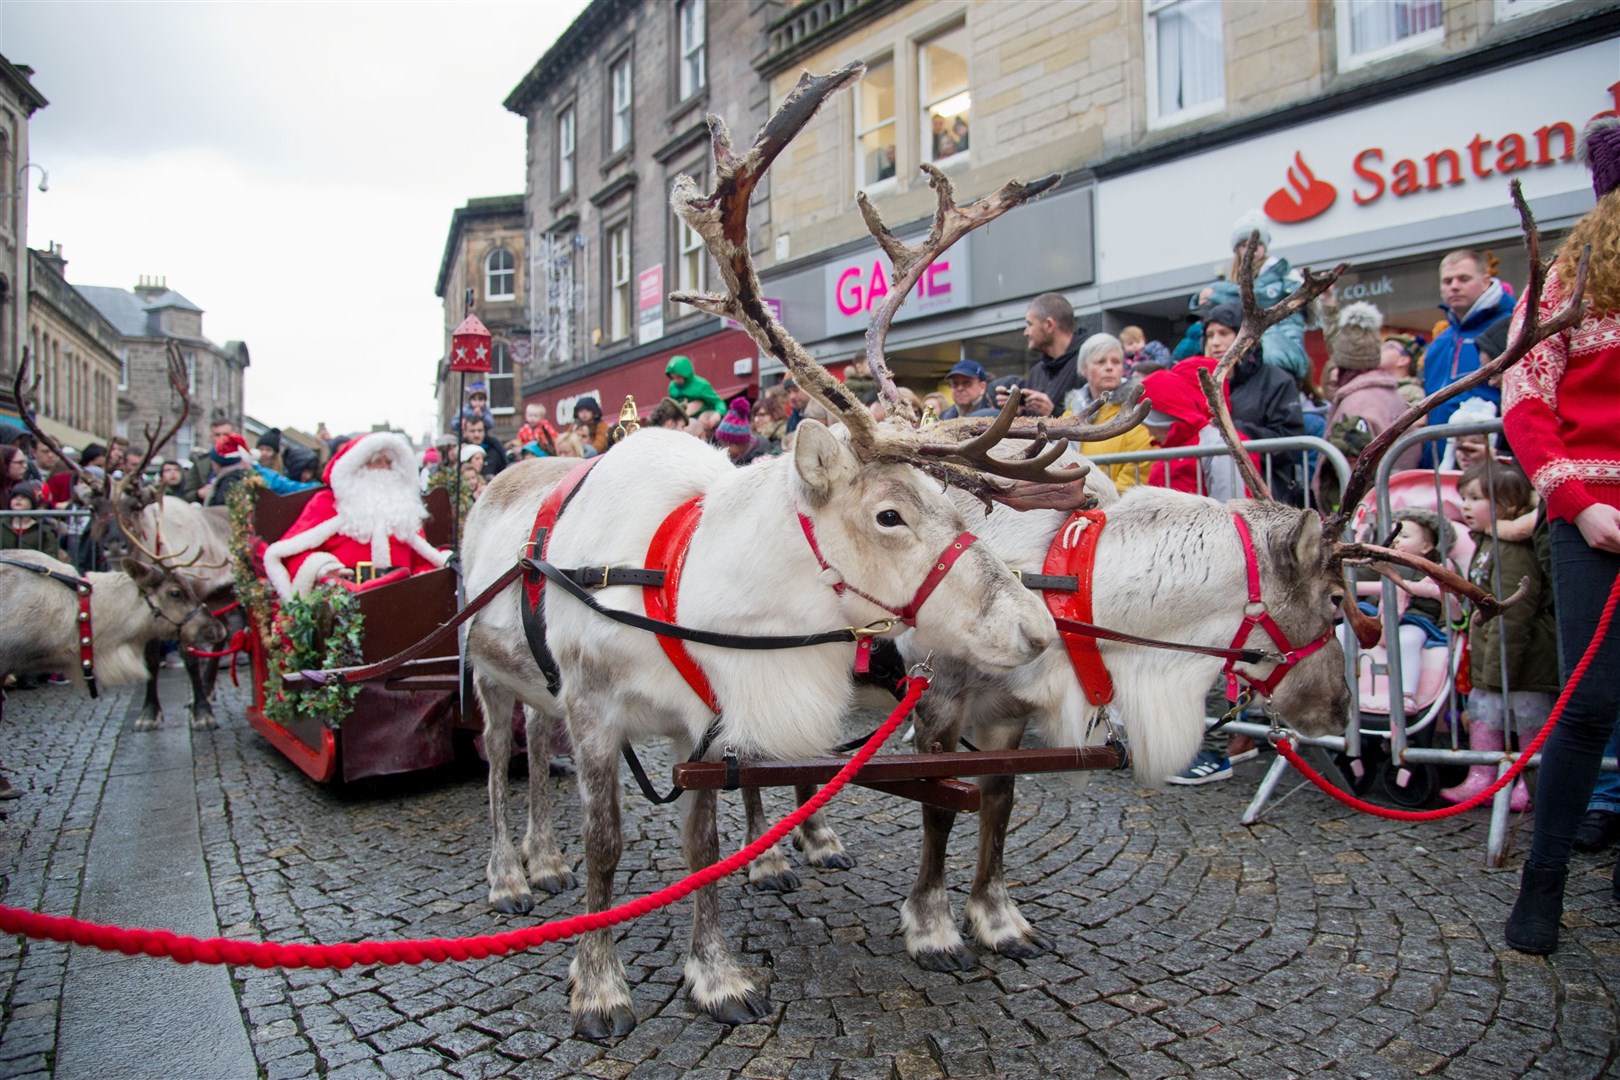 Santa and his reindeer arrive to a large crowd on the high street in 2018.